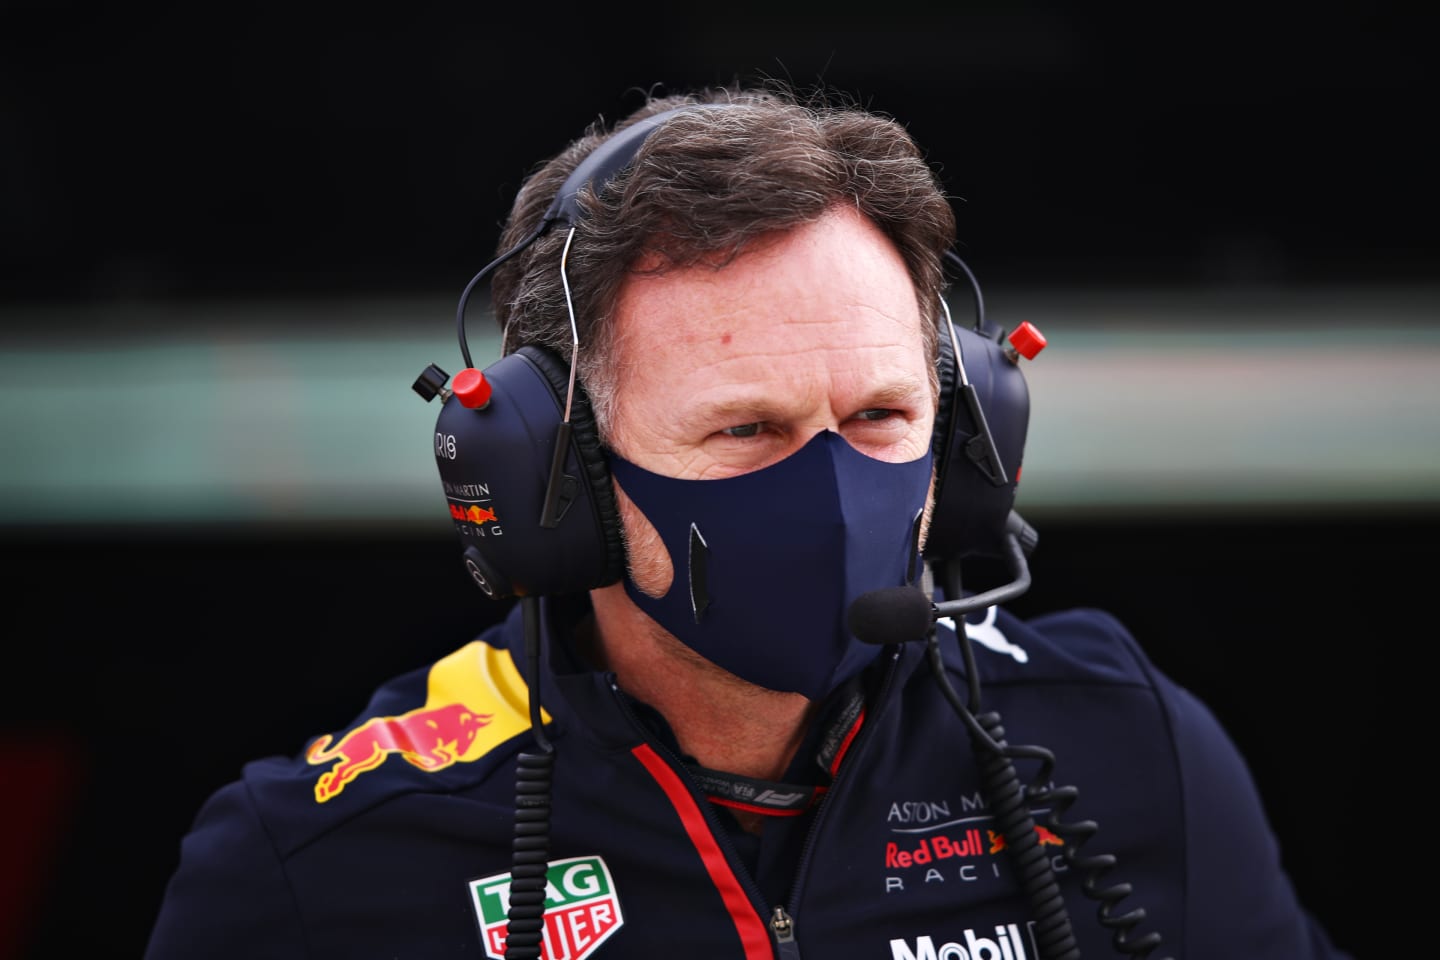 IMOLA, ITALY - NOVEMBER 01: Red Bull Racing Team Principal Christian Horner looks on during the F1